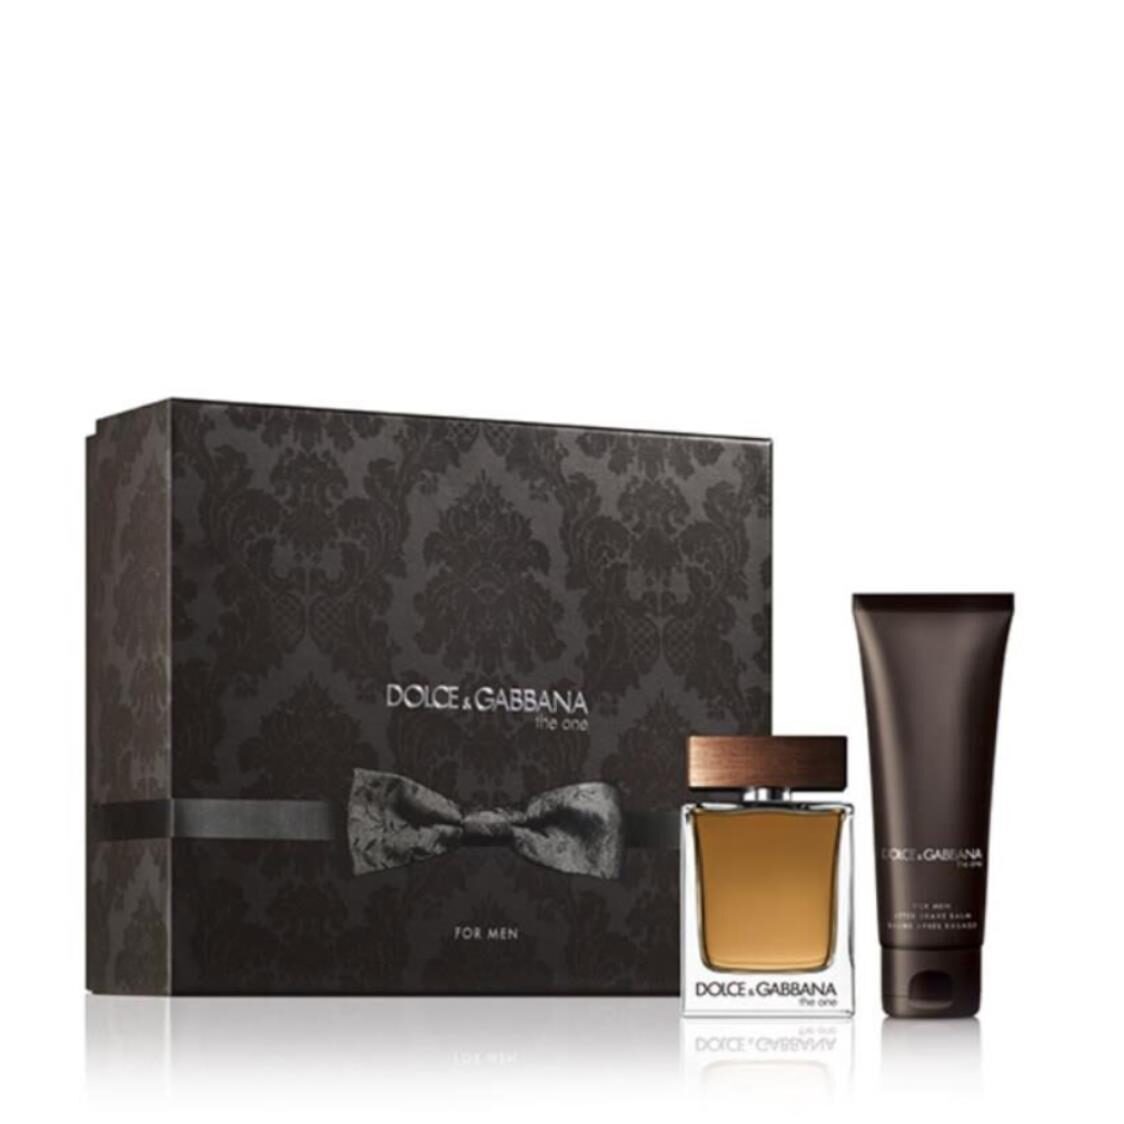 Dolce  Gabbana The One For Men EDT 50ml Duo Gift Set